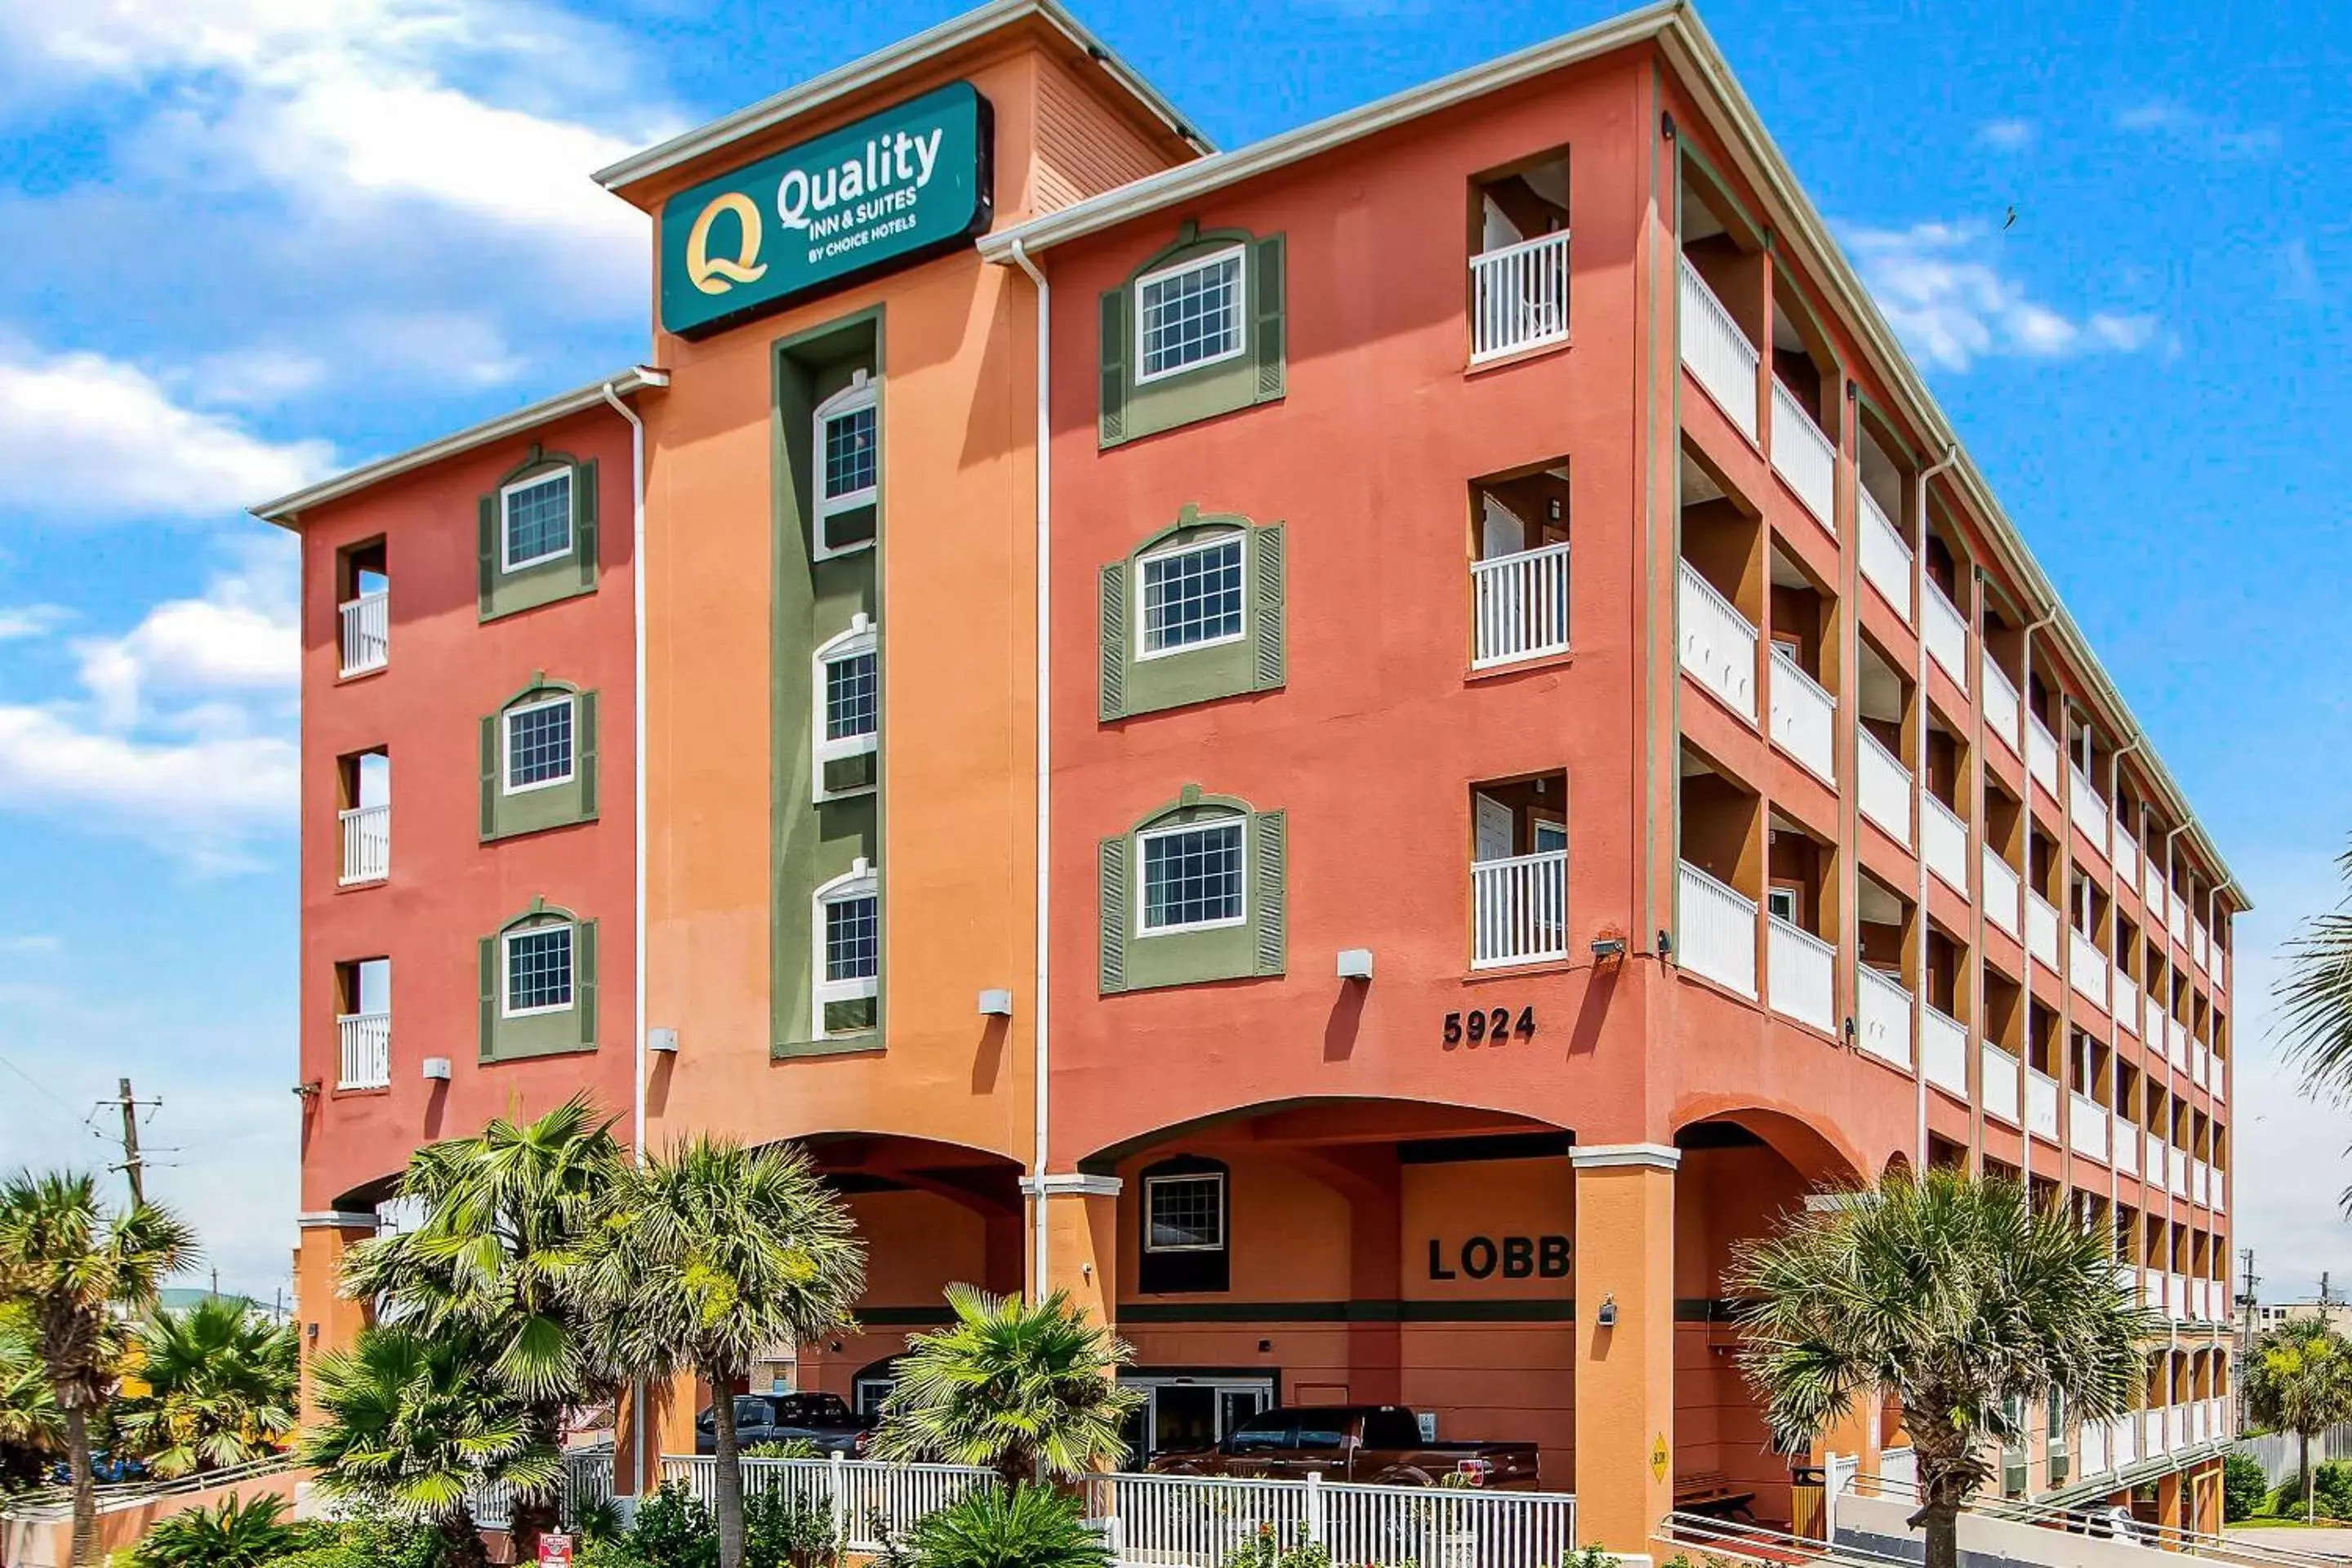 Property Building in Quality Inn & Suites Beachfront